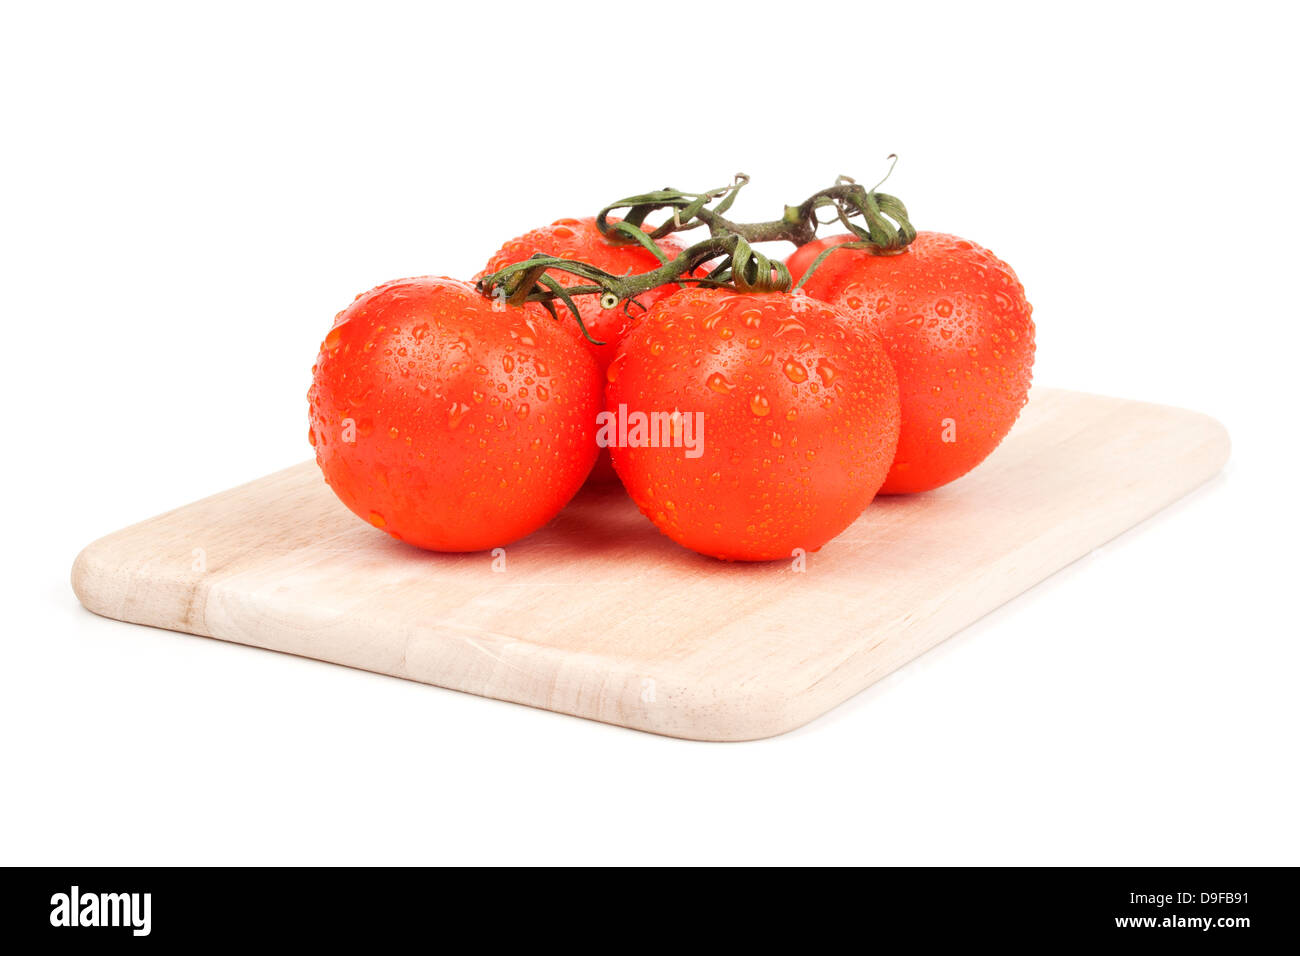 Shrub tomatoes on a wooden board Tomatoes on a wooden board Stock Photo